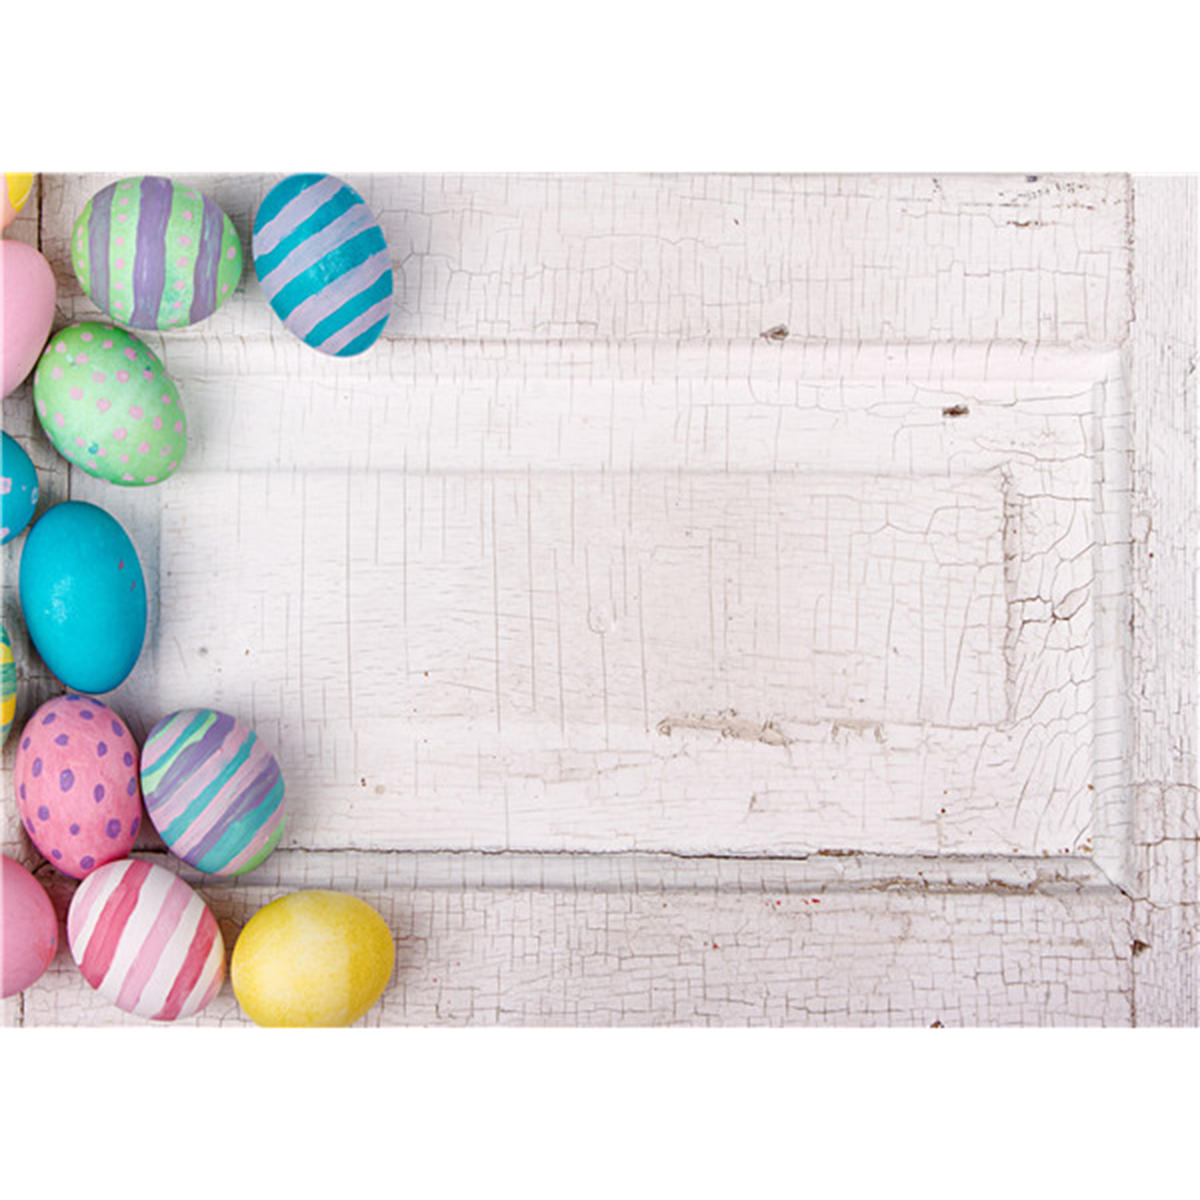 5x7FT Vinyl Easter Egg White Wall Photography Achtergrond Achtergrond Studio Prop